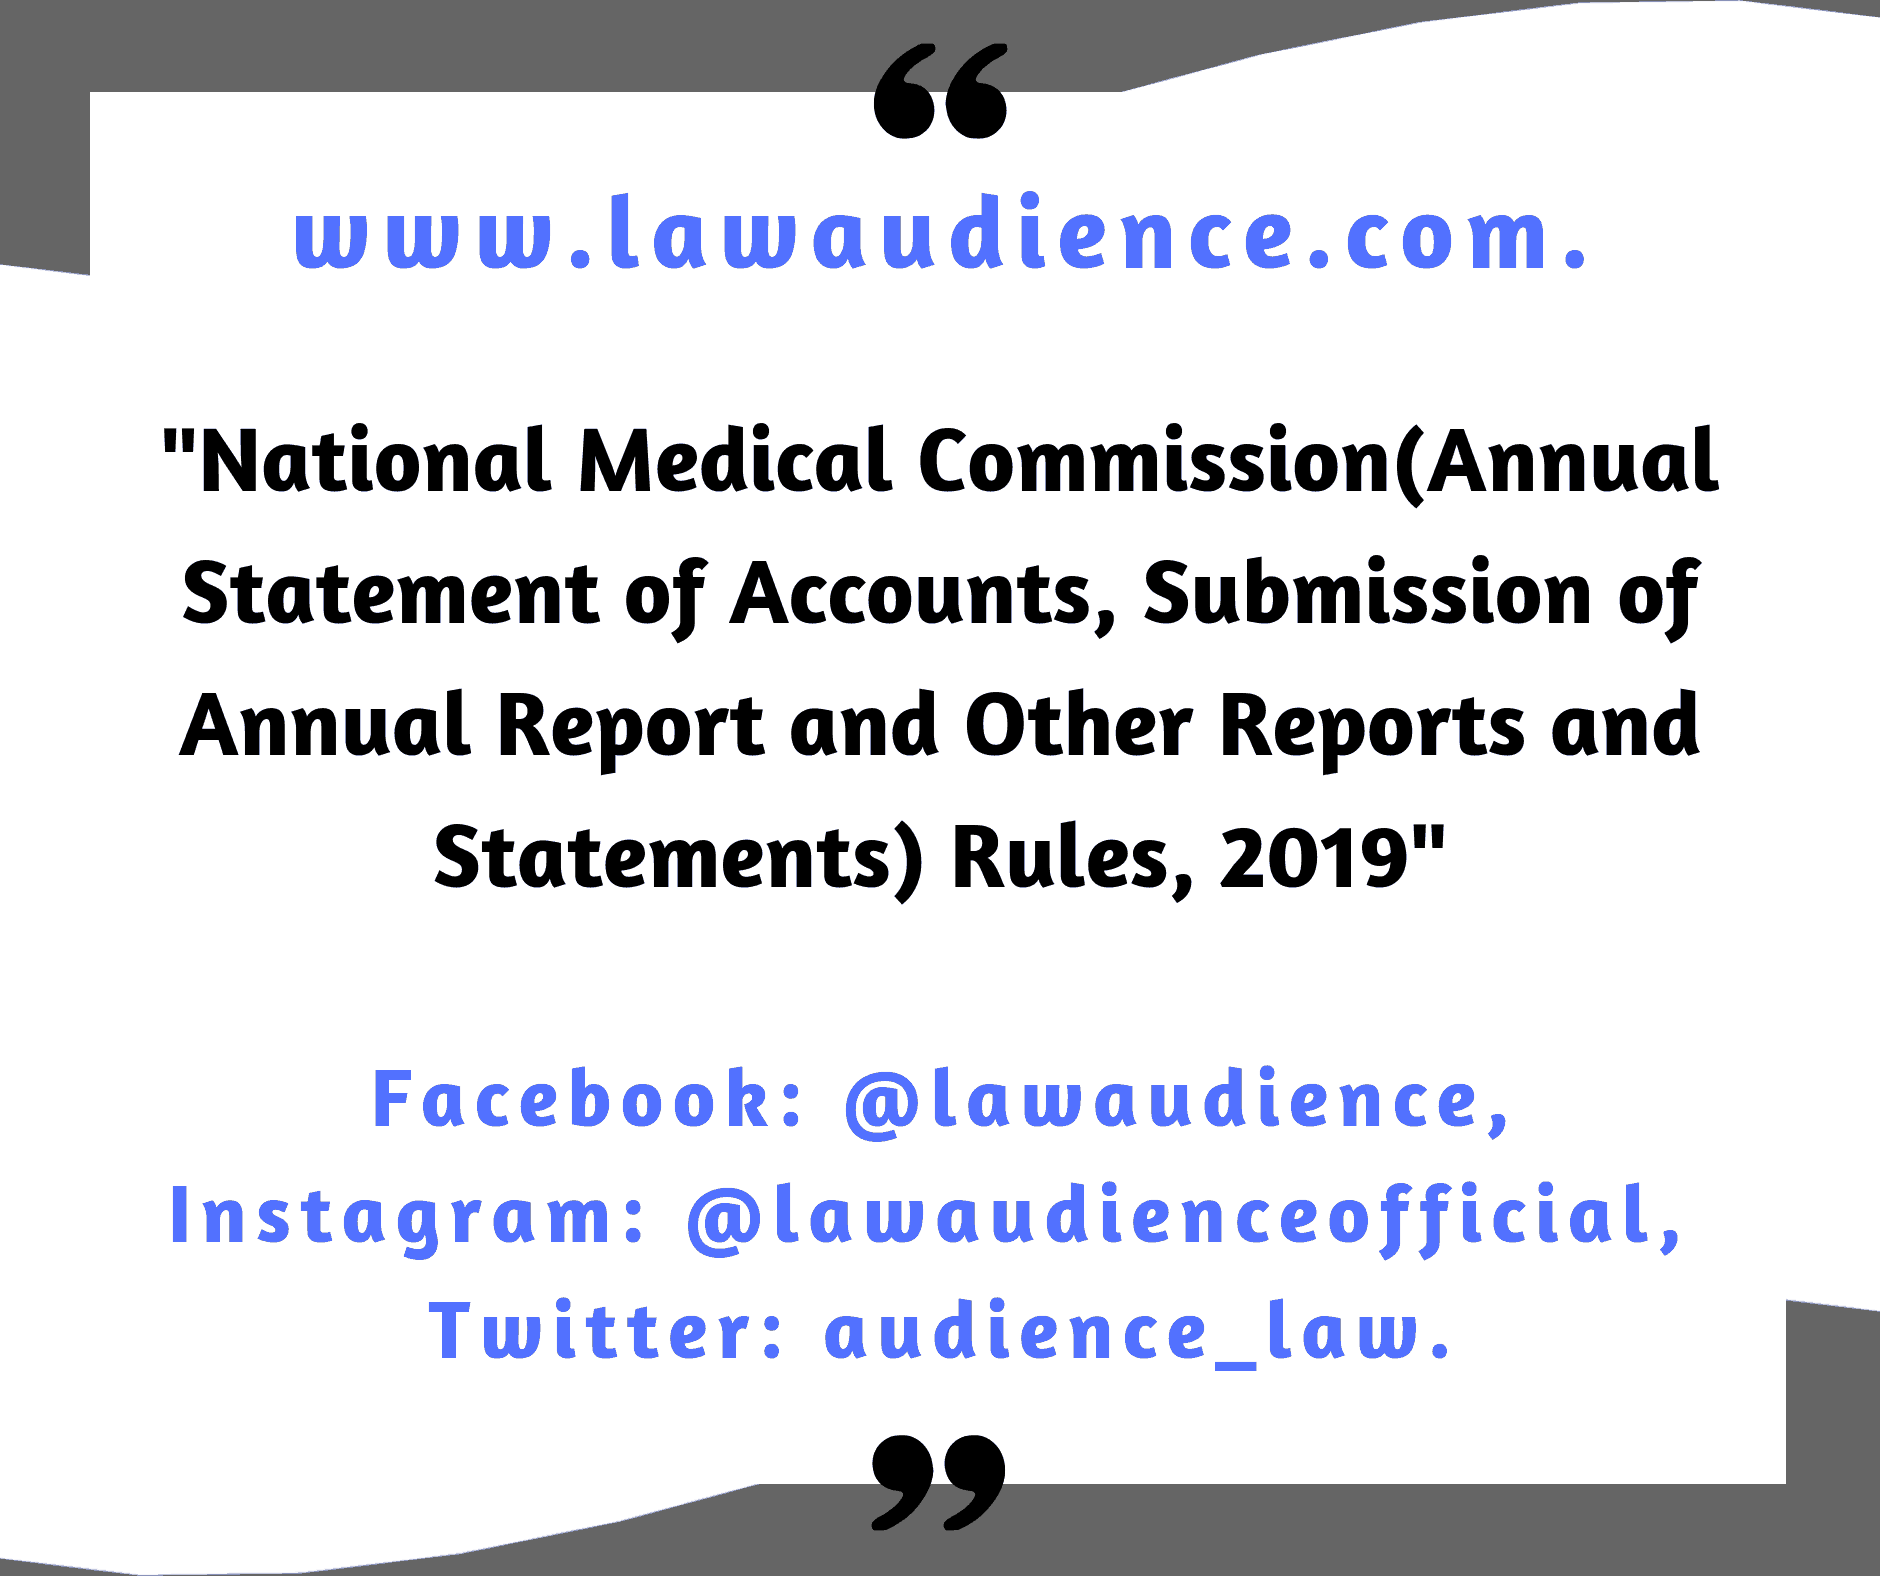 You are currently viewing National Medical Commission (Annual Statement of Accounts, Submission of Annual Report and Other Reports and Statements) Rules, 2019.